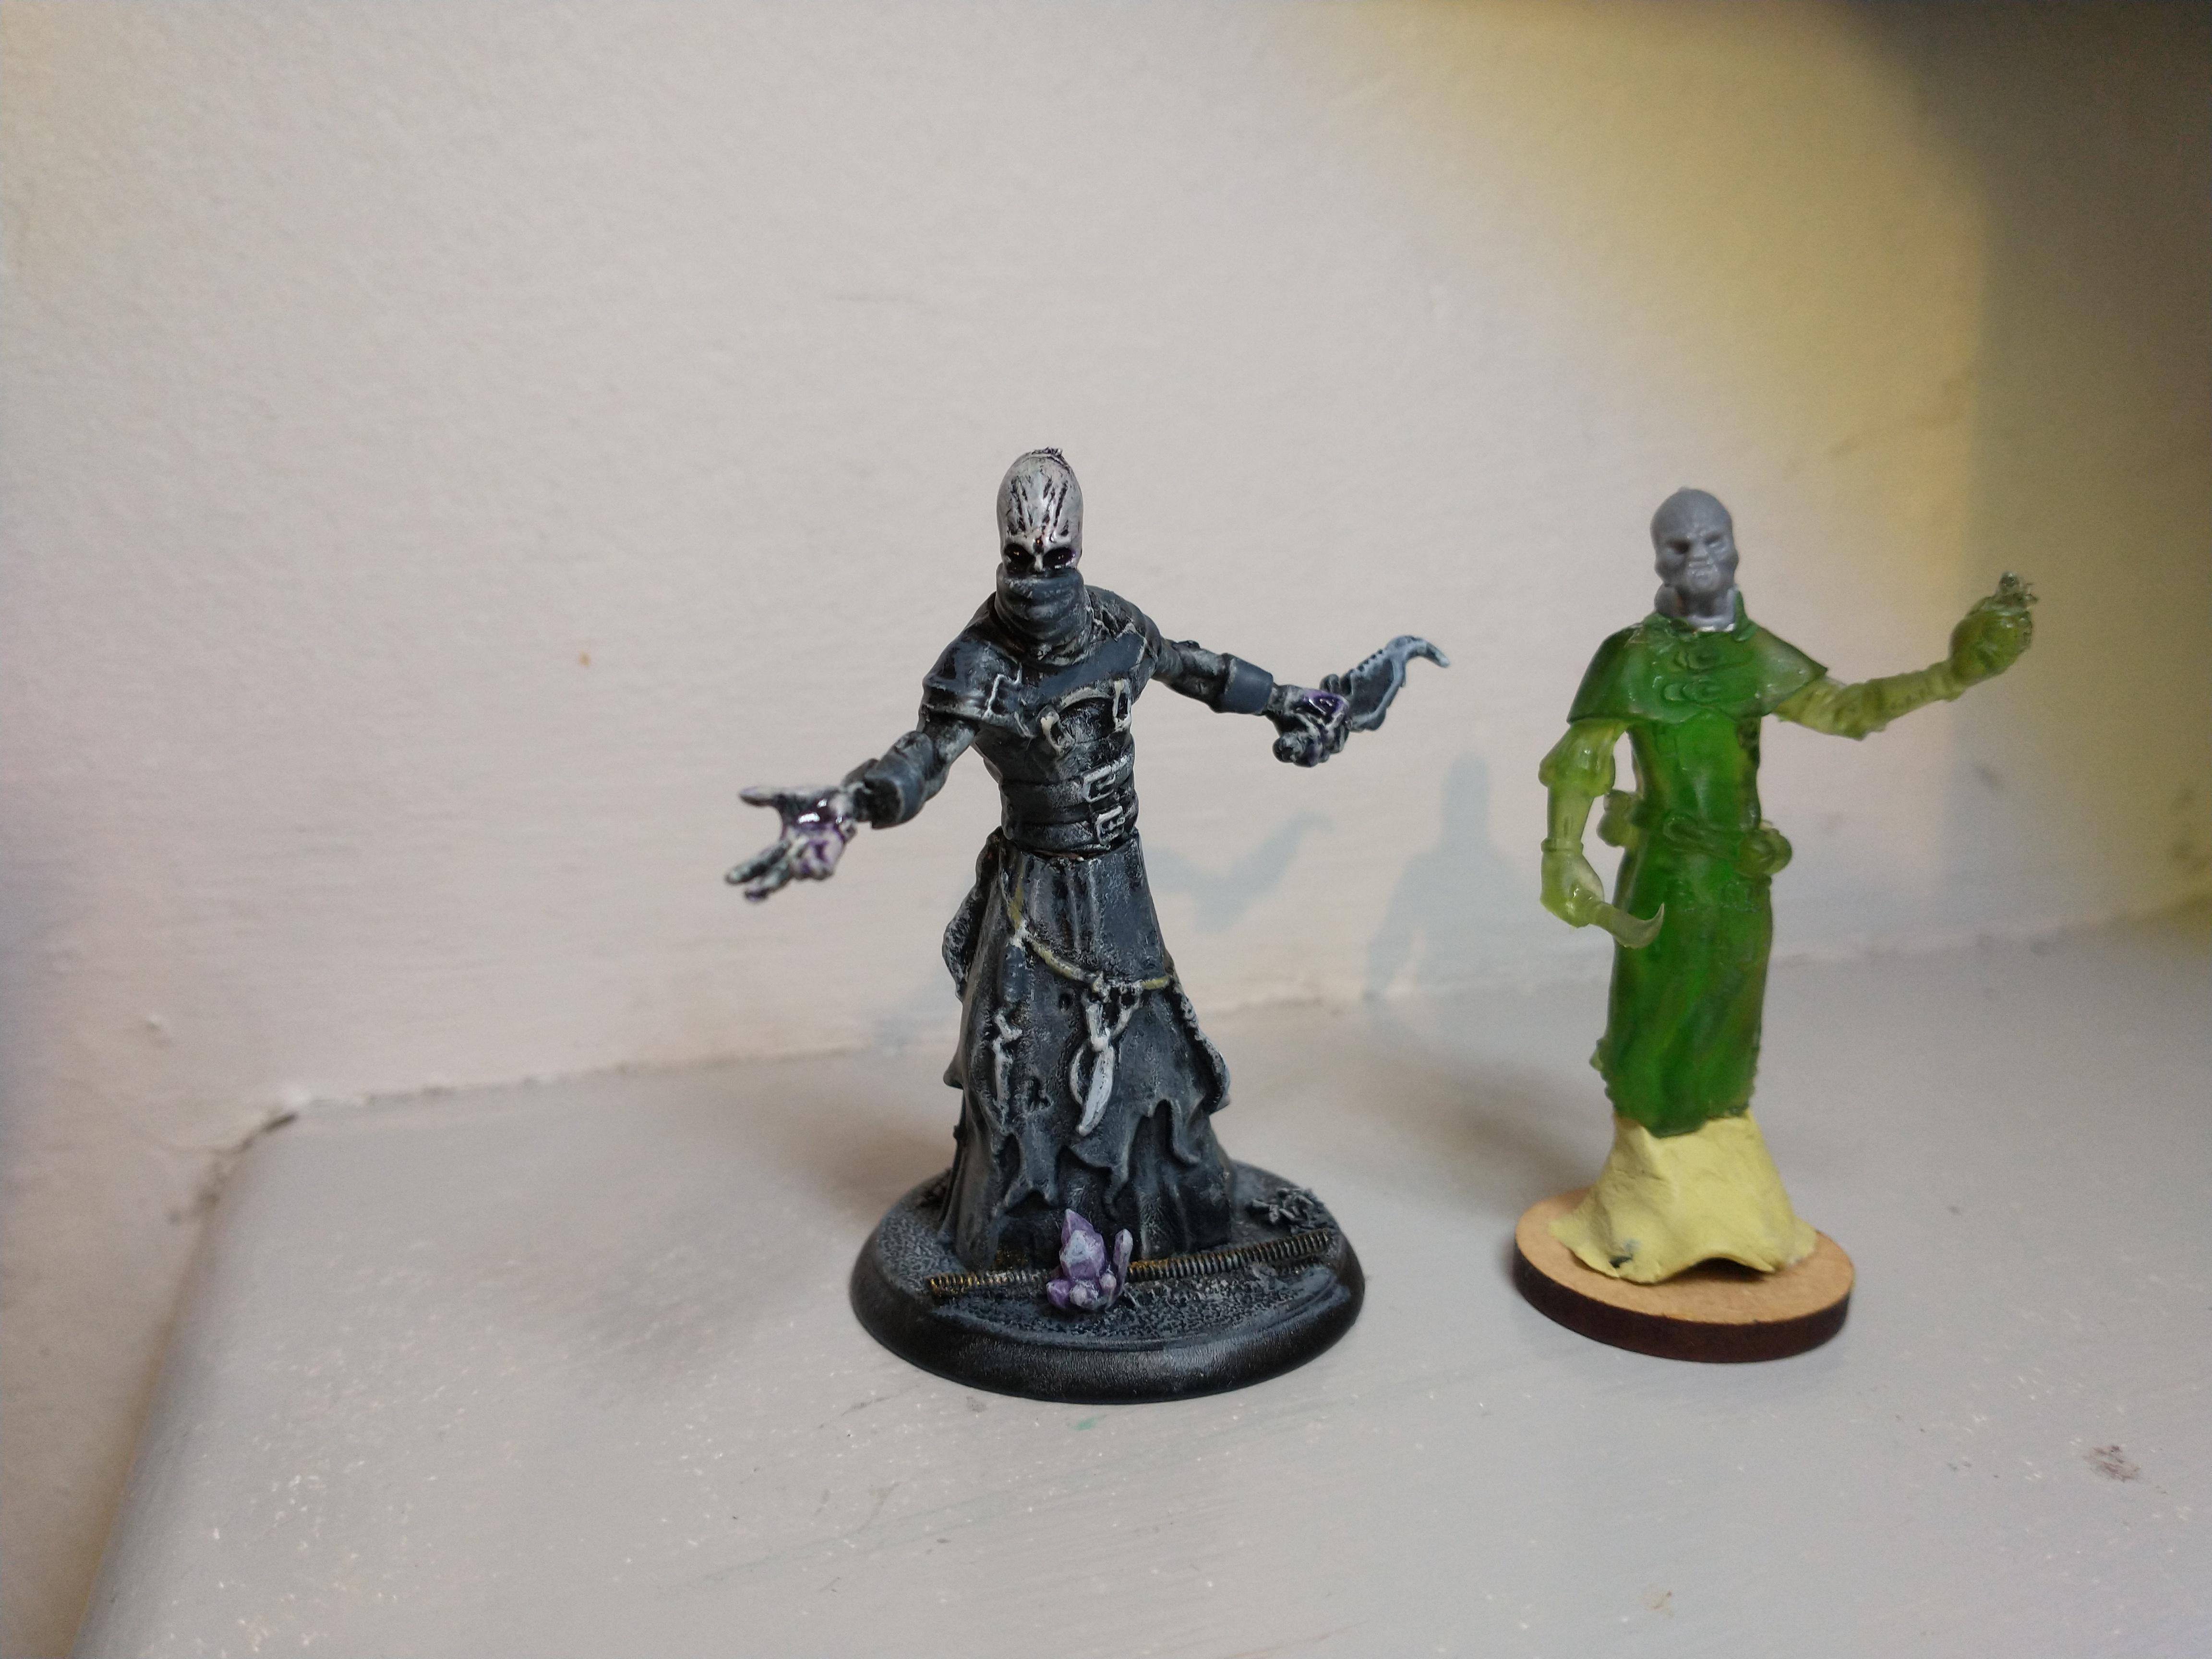 Flesh stalker and printed counterpart